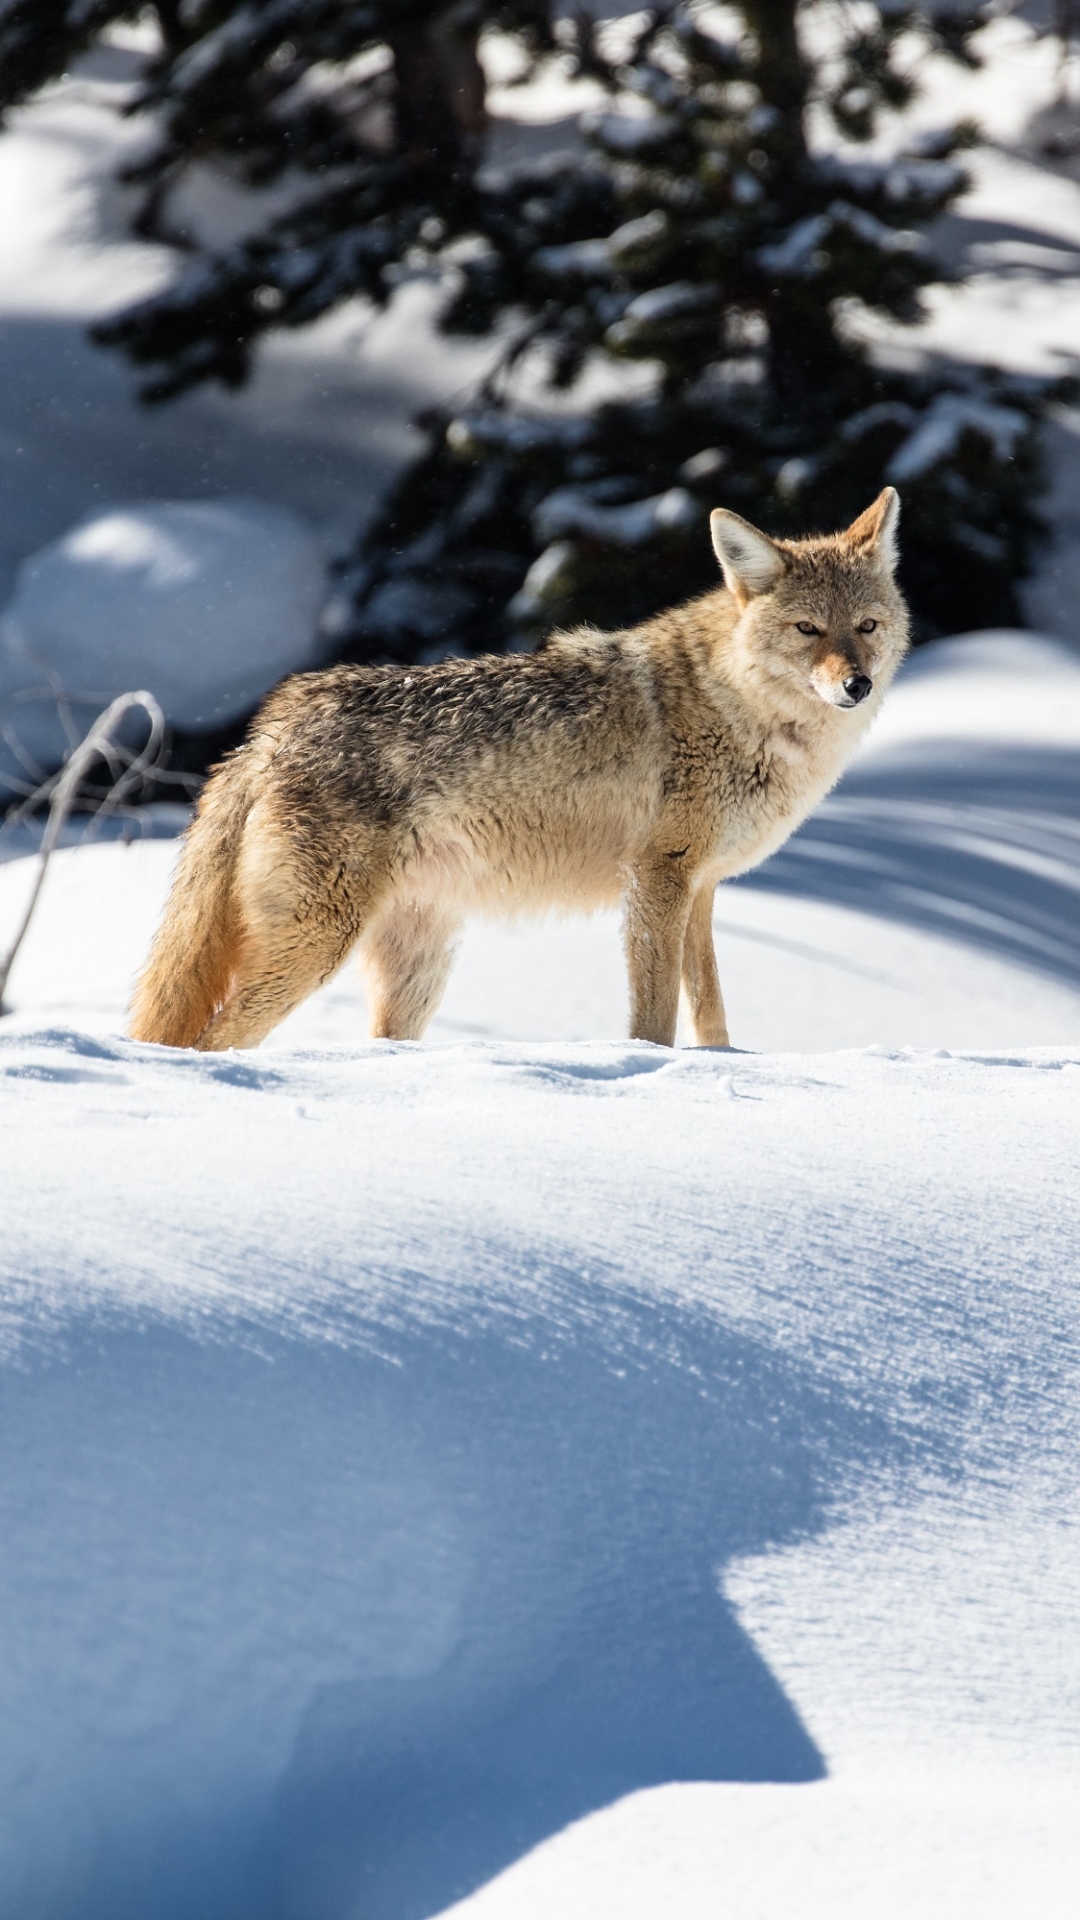 Coyote in Yellowstone National Park, Wyoming by skeeze